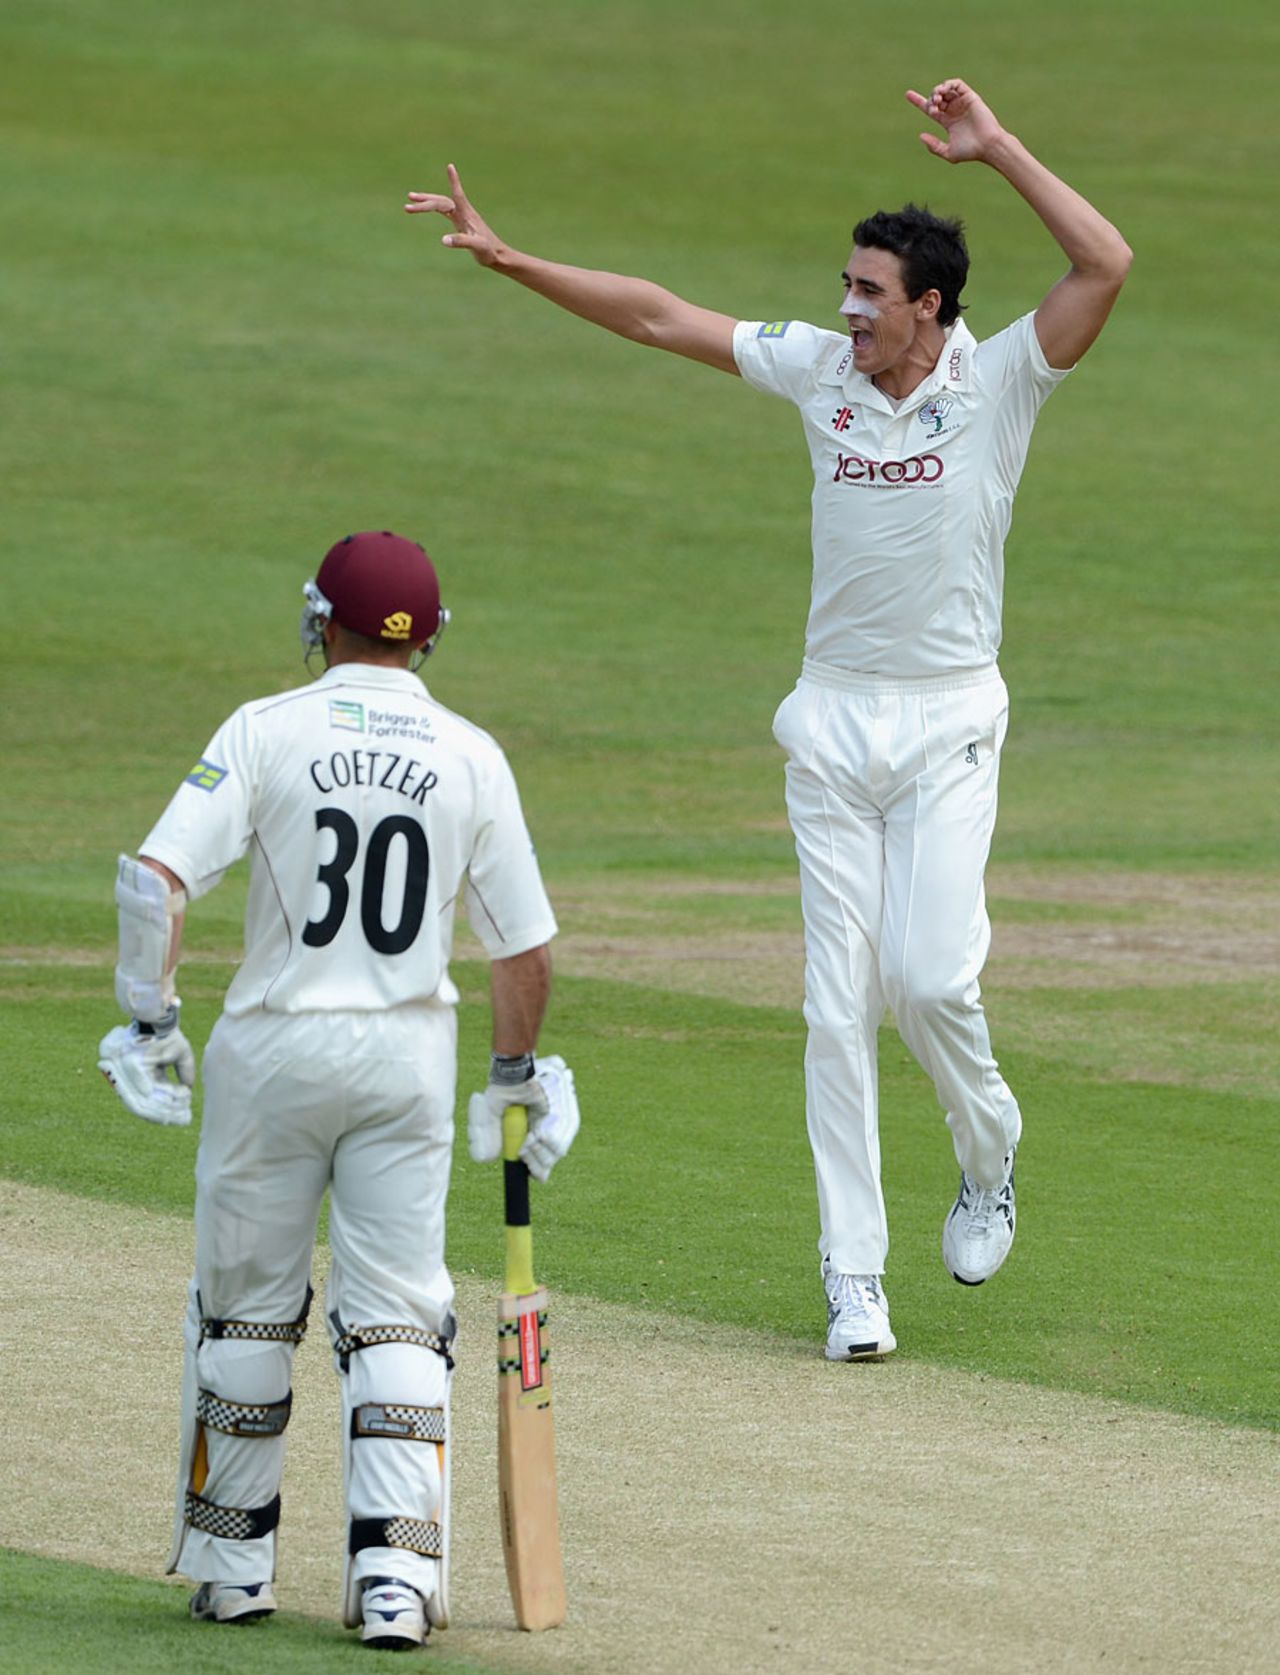 Mitchell Starc trapped Rob White lbw, Yorkshire v Northamptonshire, County Championship, Division Two, May 30, 2012